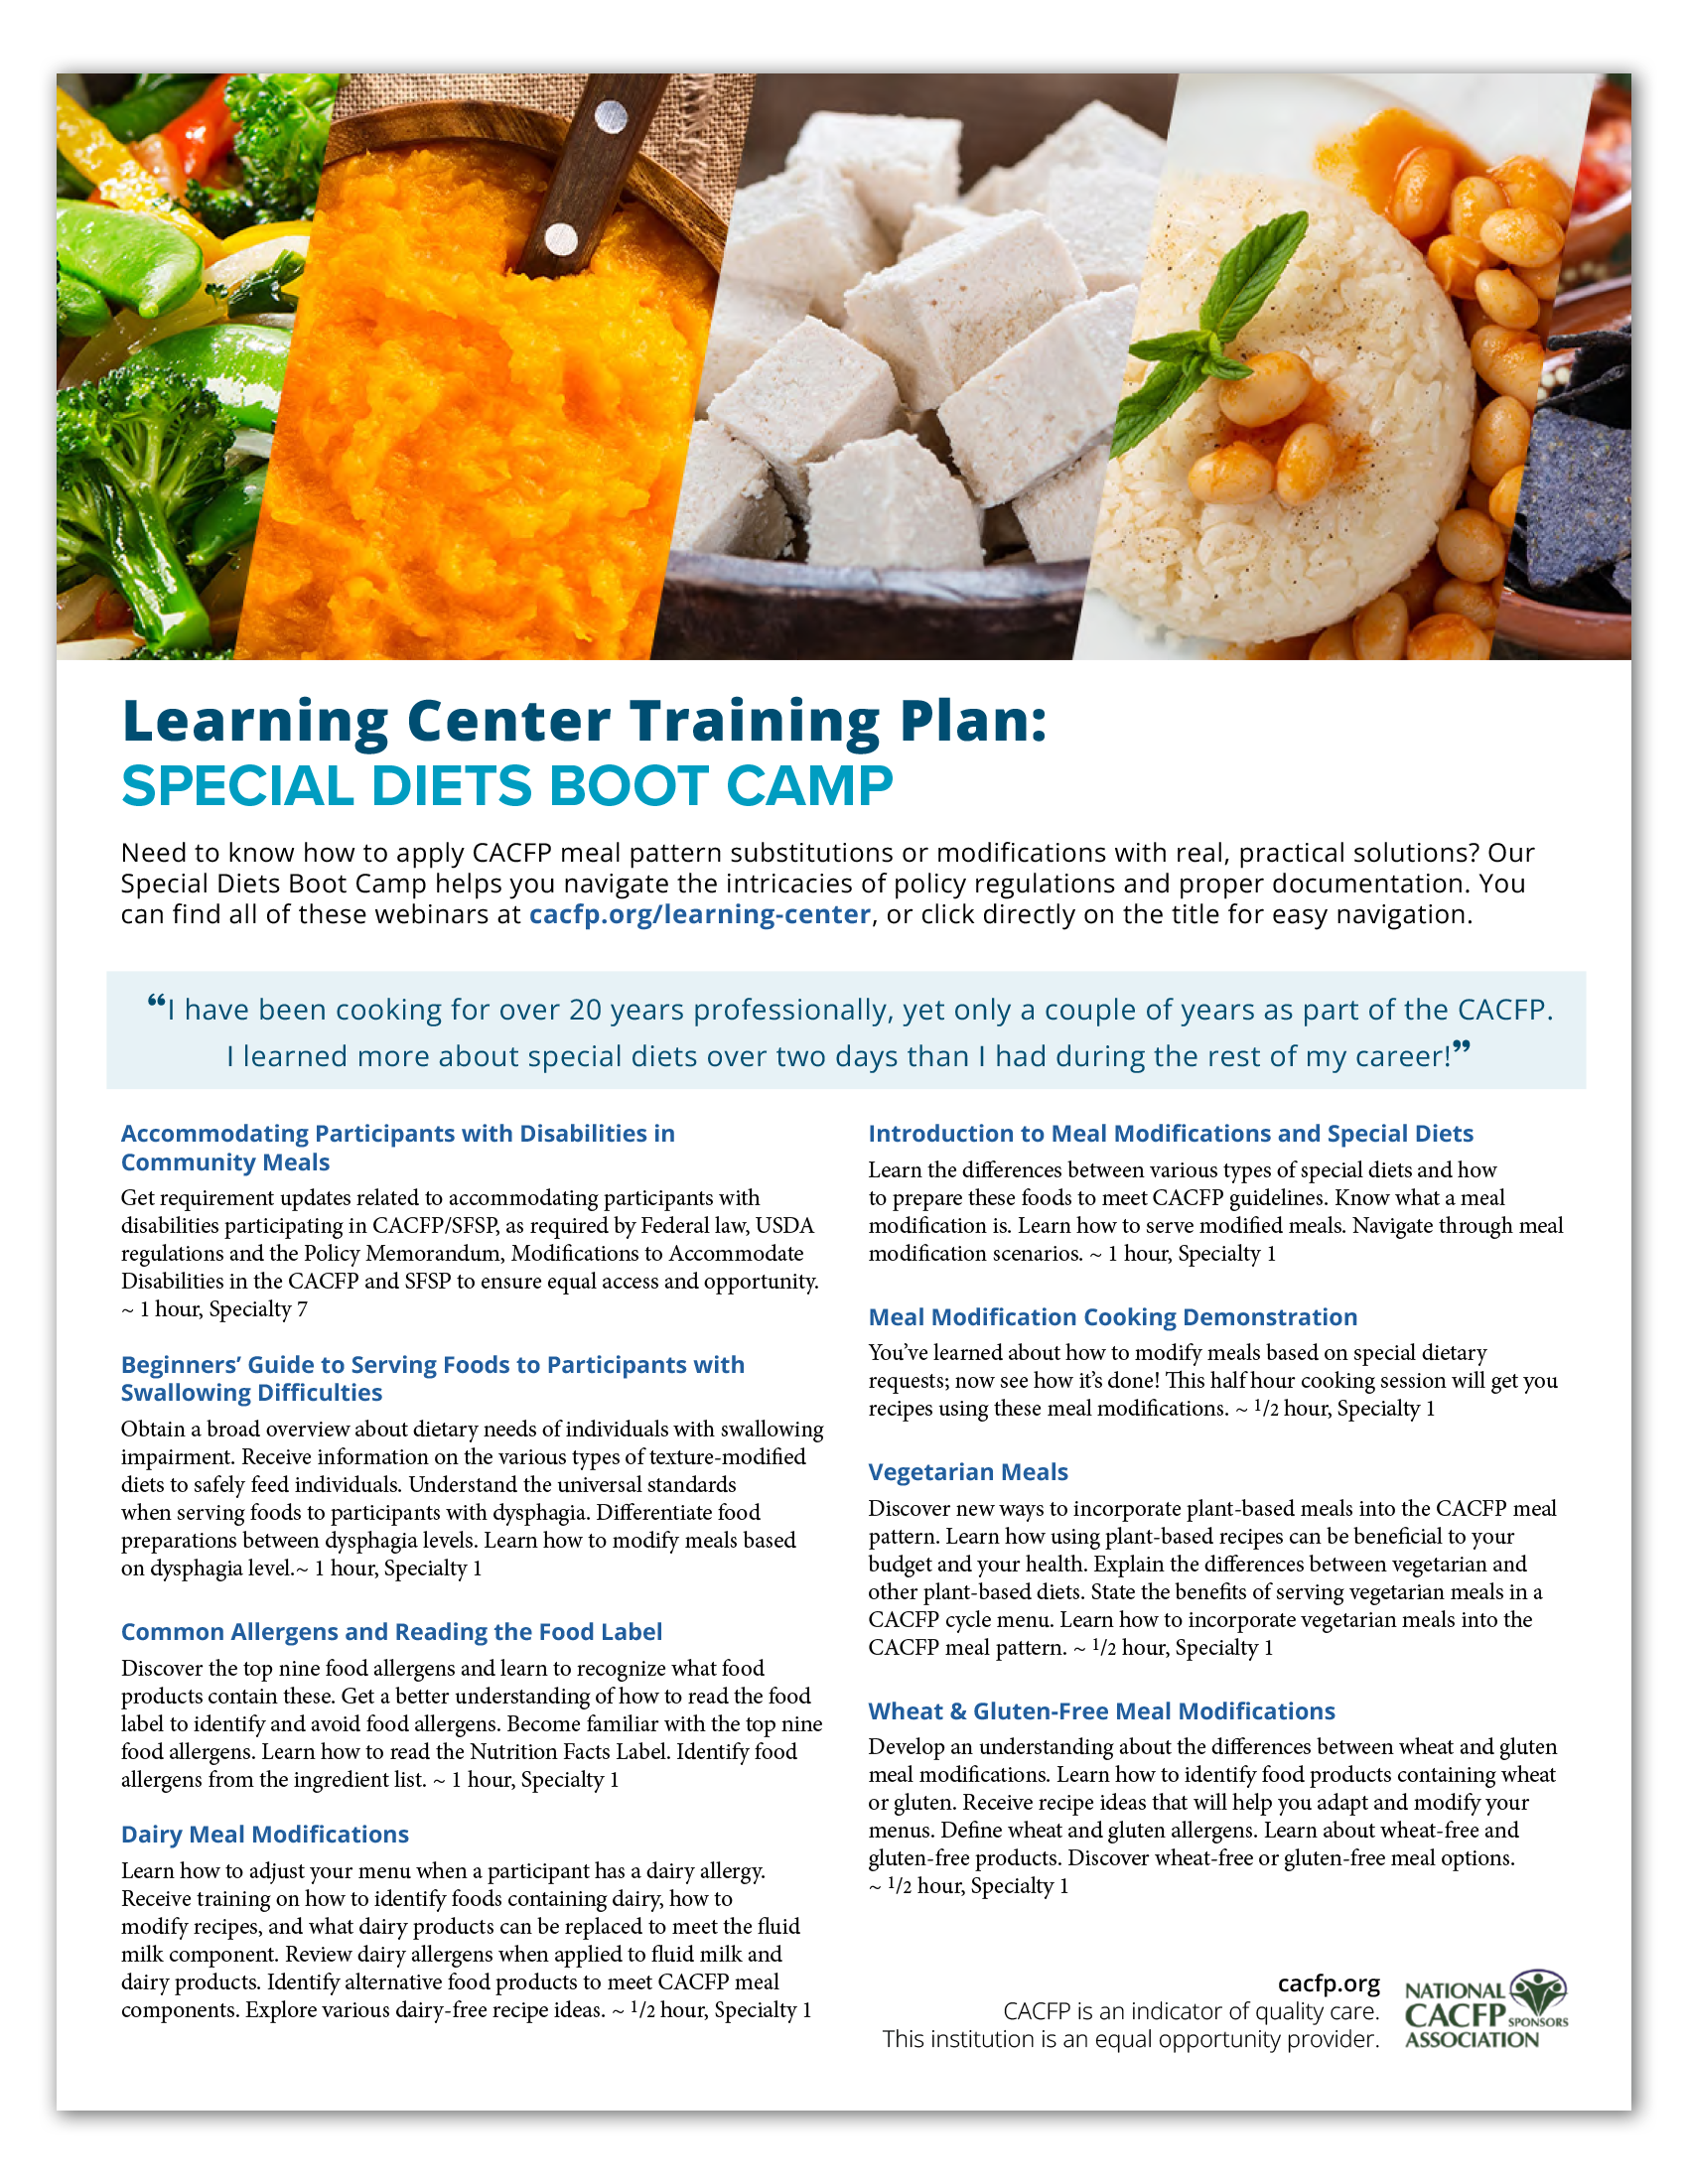 Special Diets Boot Camp